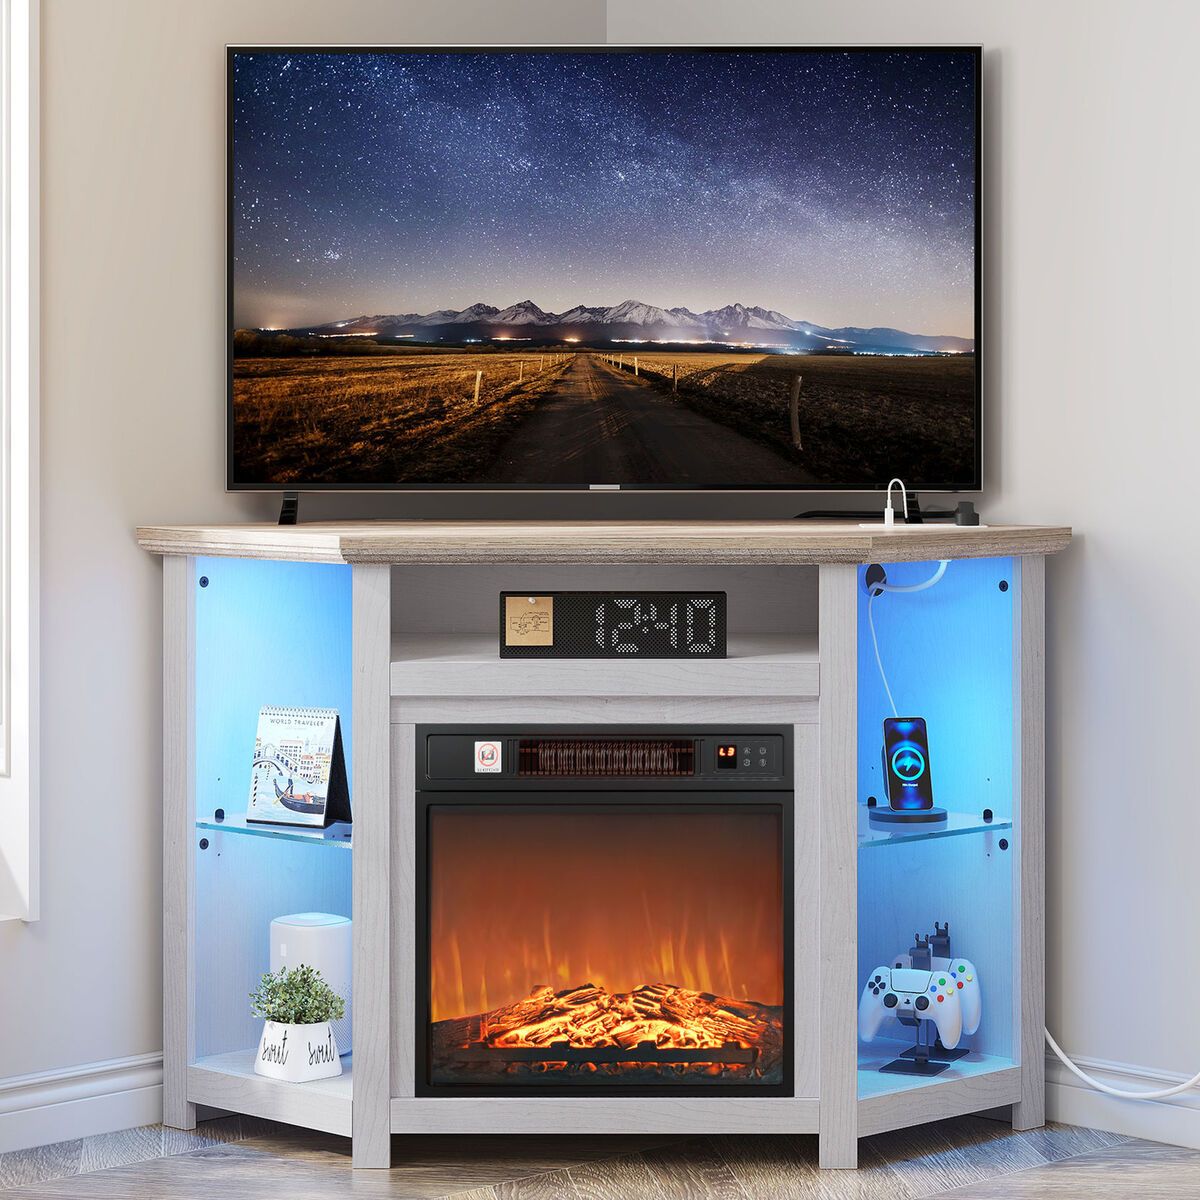 Fireplace Corner Tv Stand For Tvs Up To 55 Inch With Power Outlet And Led  Lights | Ebay Pertaining To Tv Stands With Led Lights & Power Outlet (View 15 of 15)